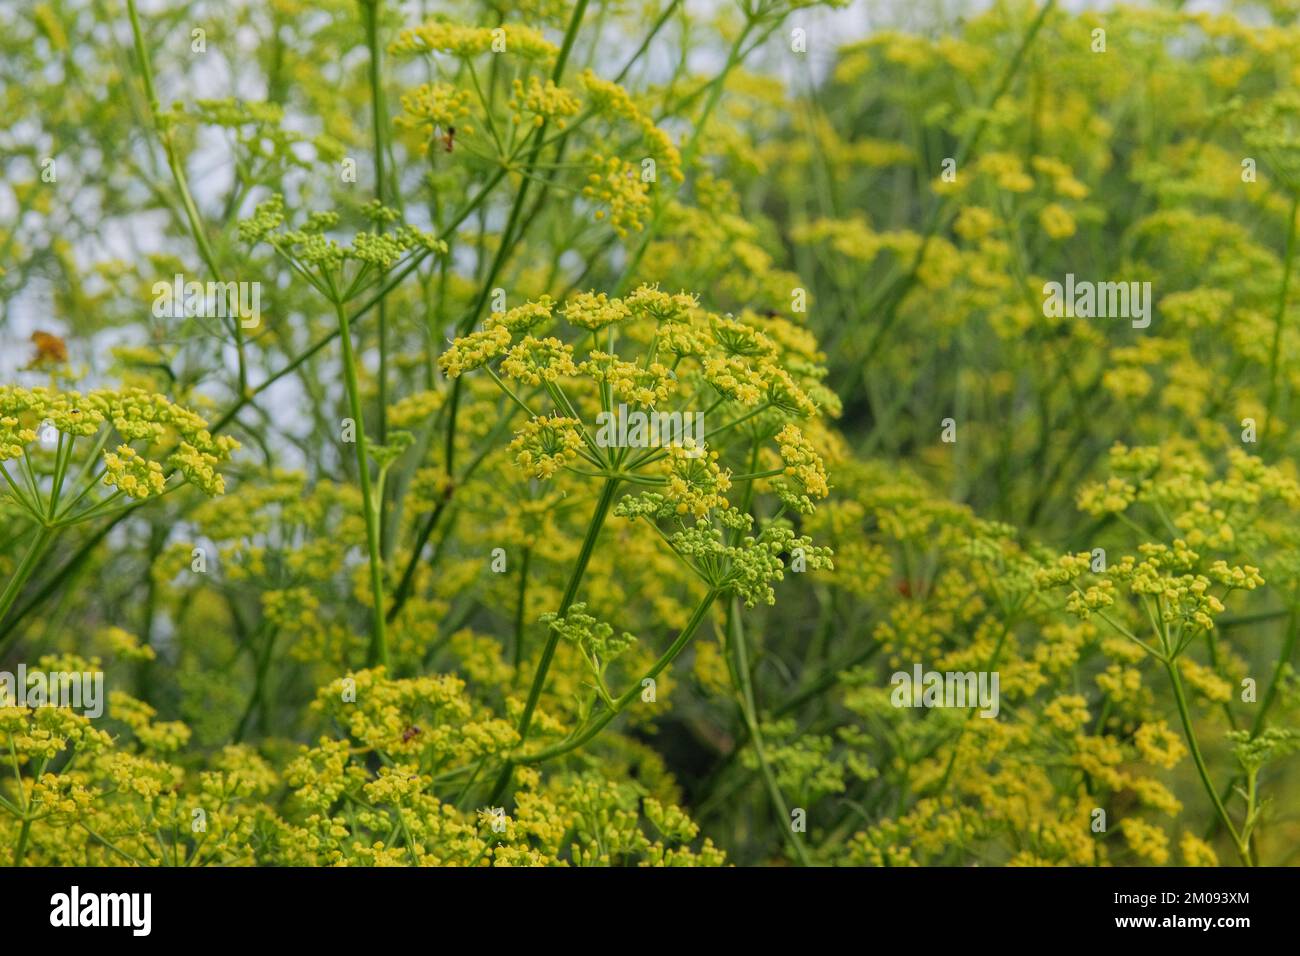 Anise. Gentle summer flowers on blurred background of green grass. Stock Photo